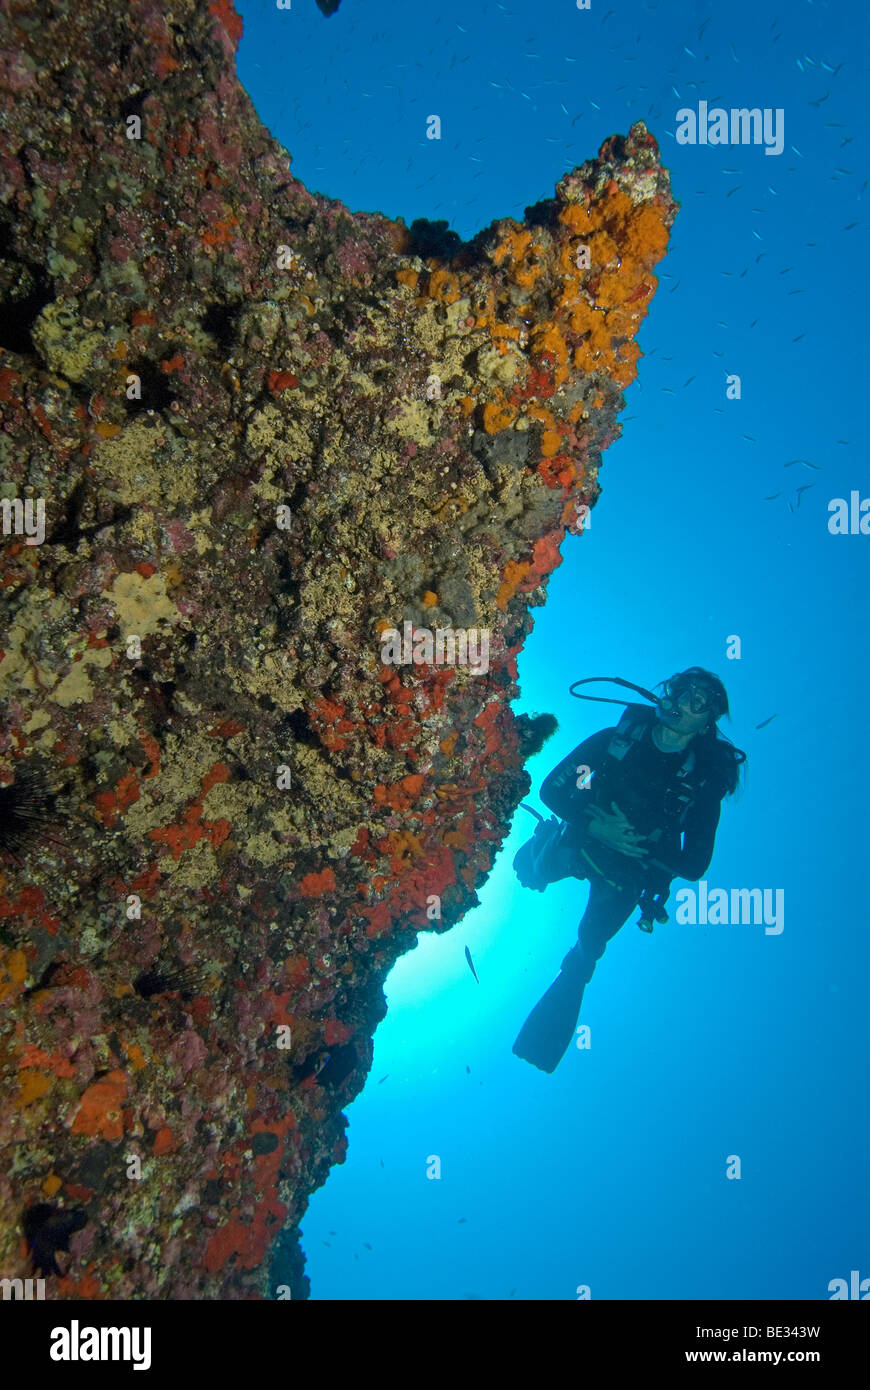 Diver and Rock covered of Corals, Lanzarote, Canary Islands, Atlantic Ocean, Spain Stock Photo